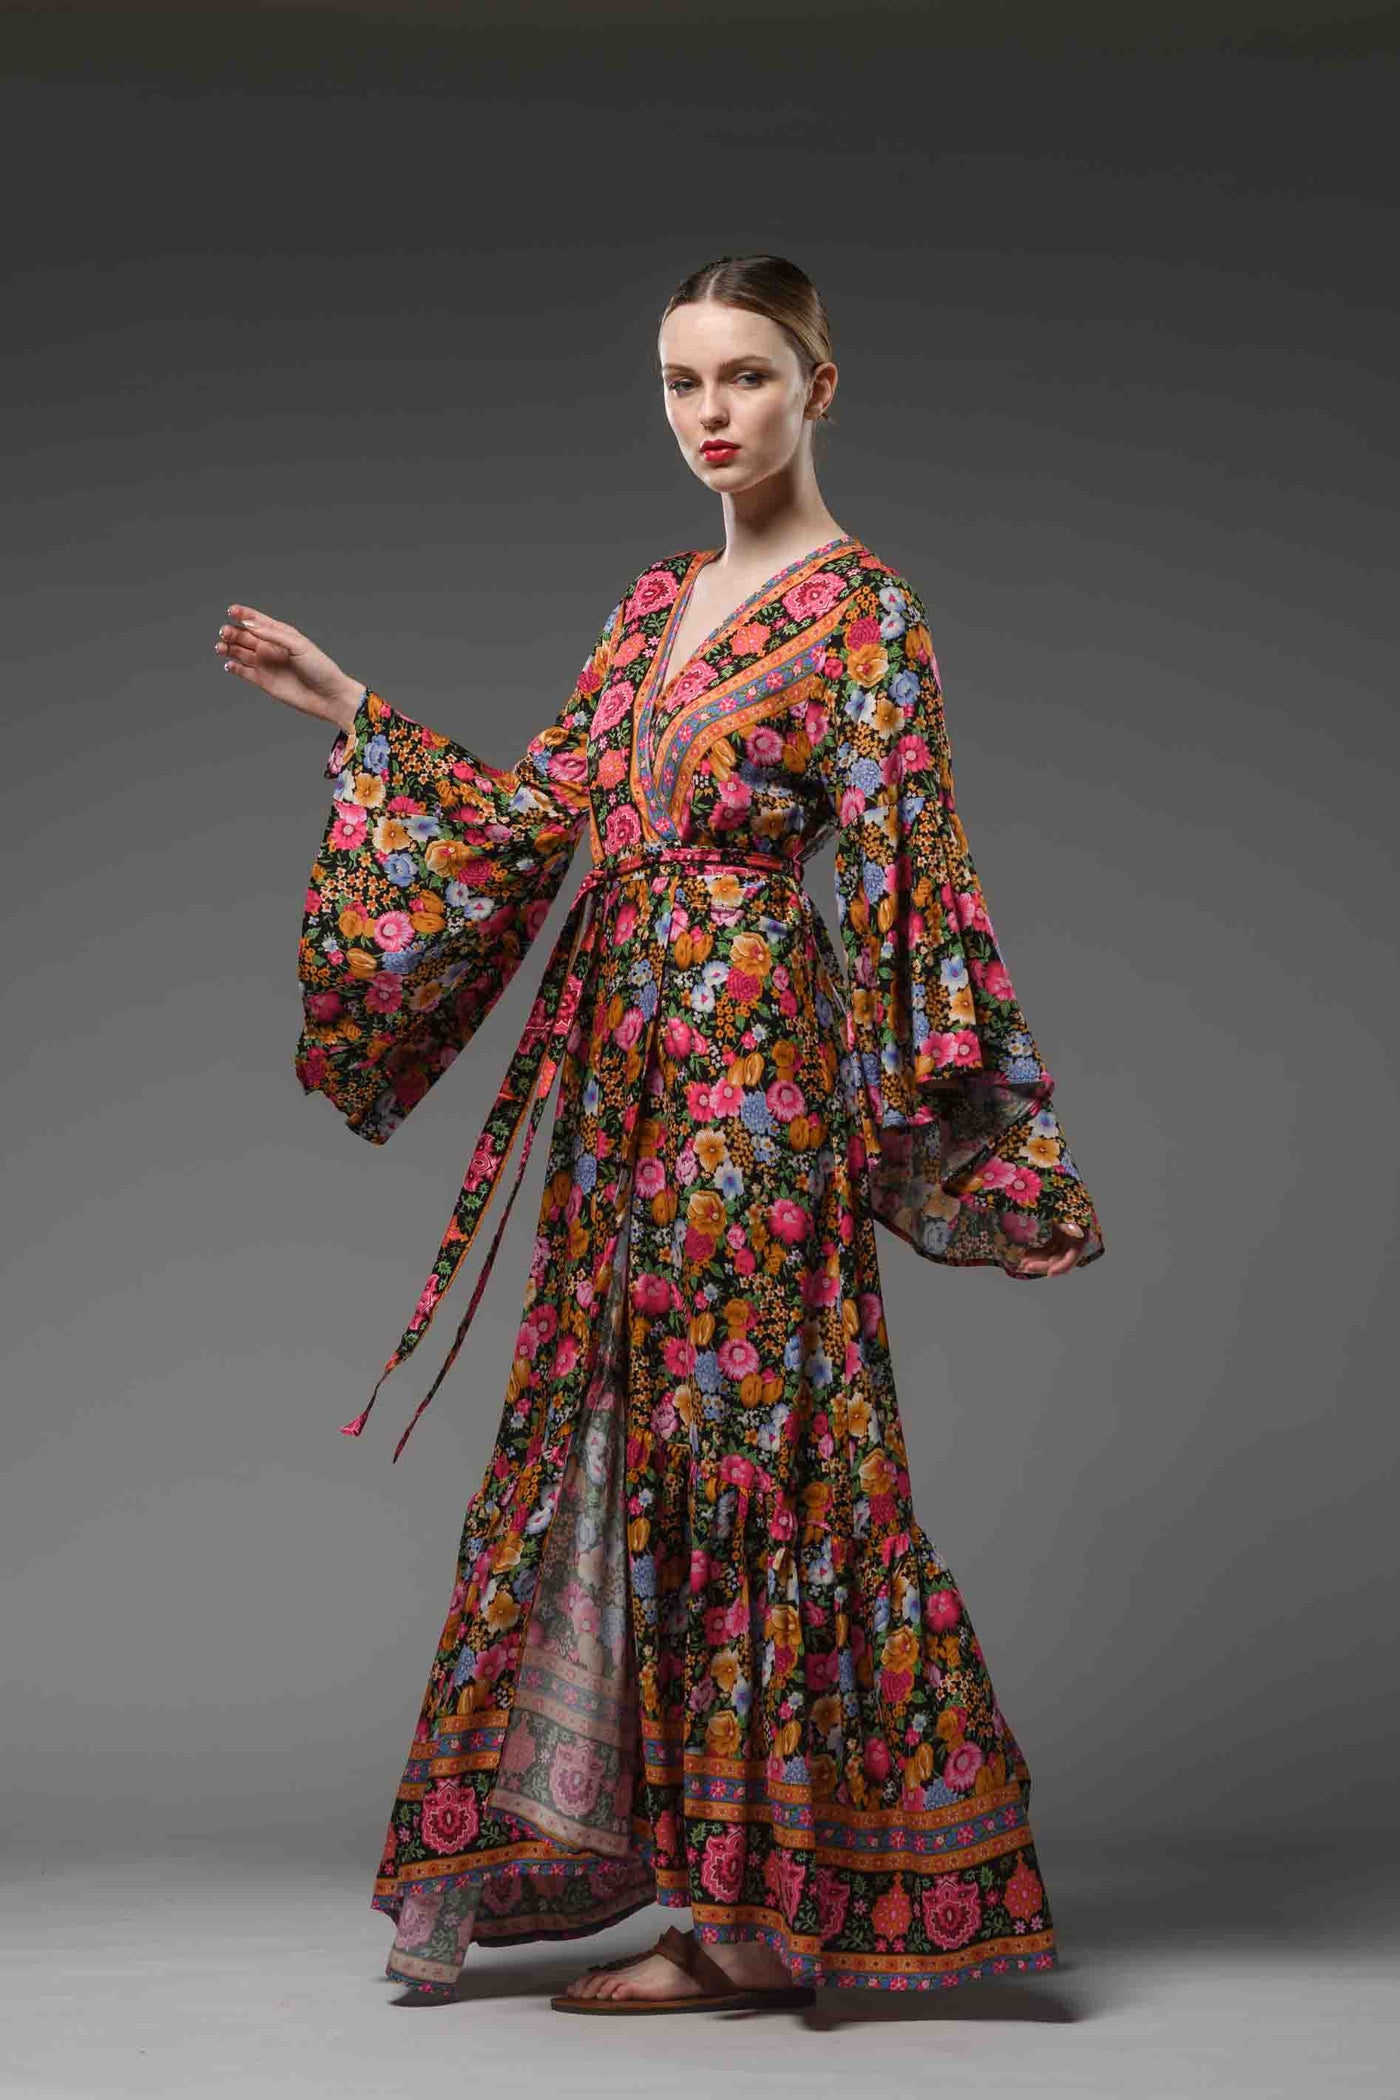 Bohemian style red floral border printed V neck ruffled self tie waist bell sleeve maxi wrap dress